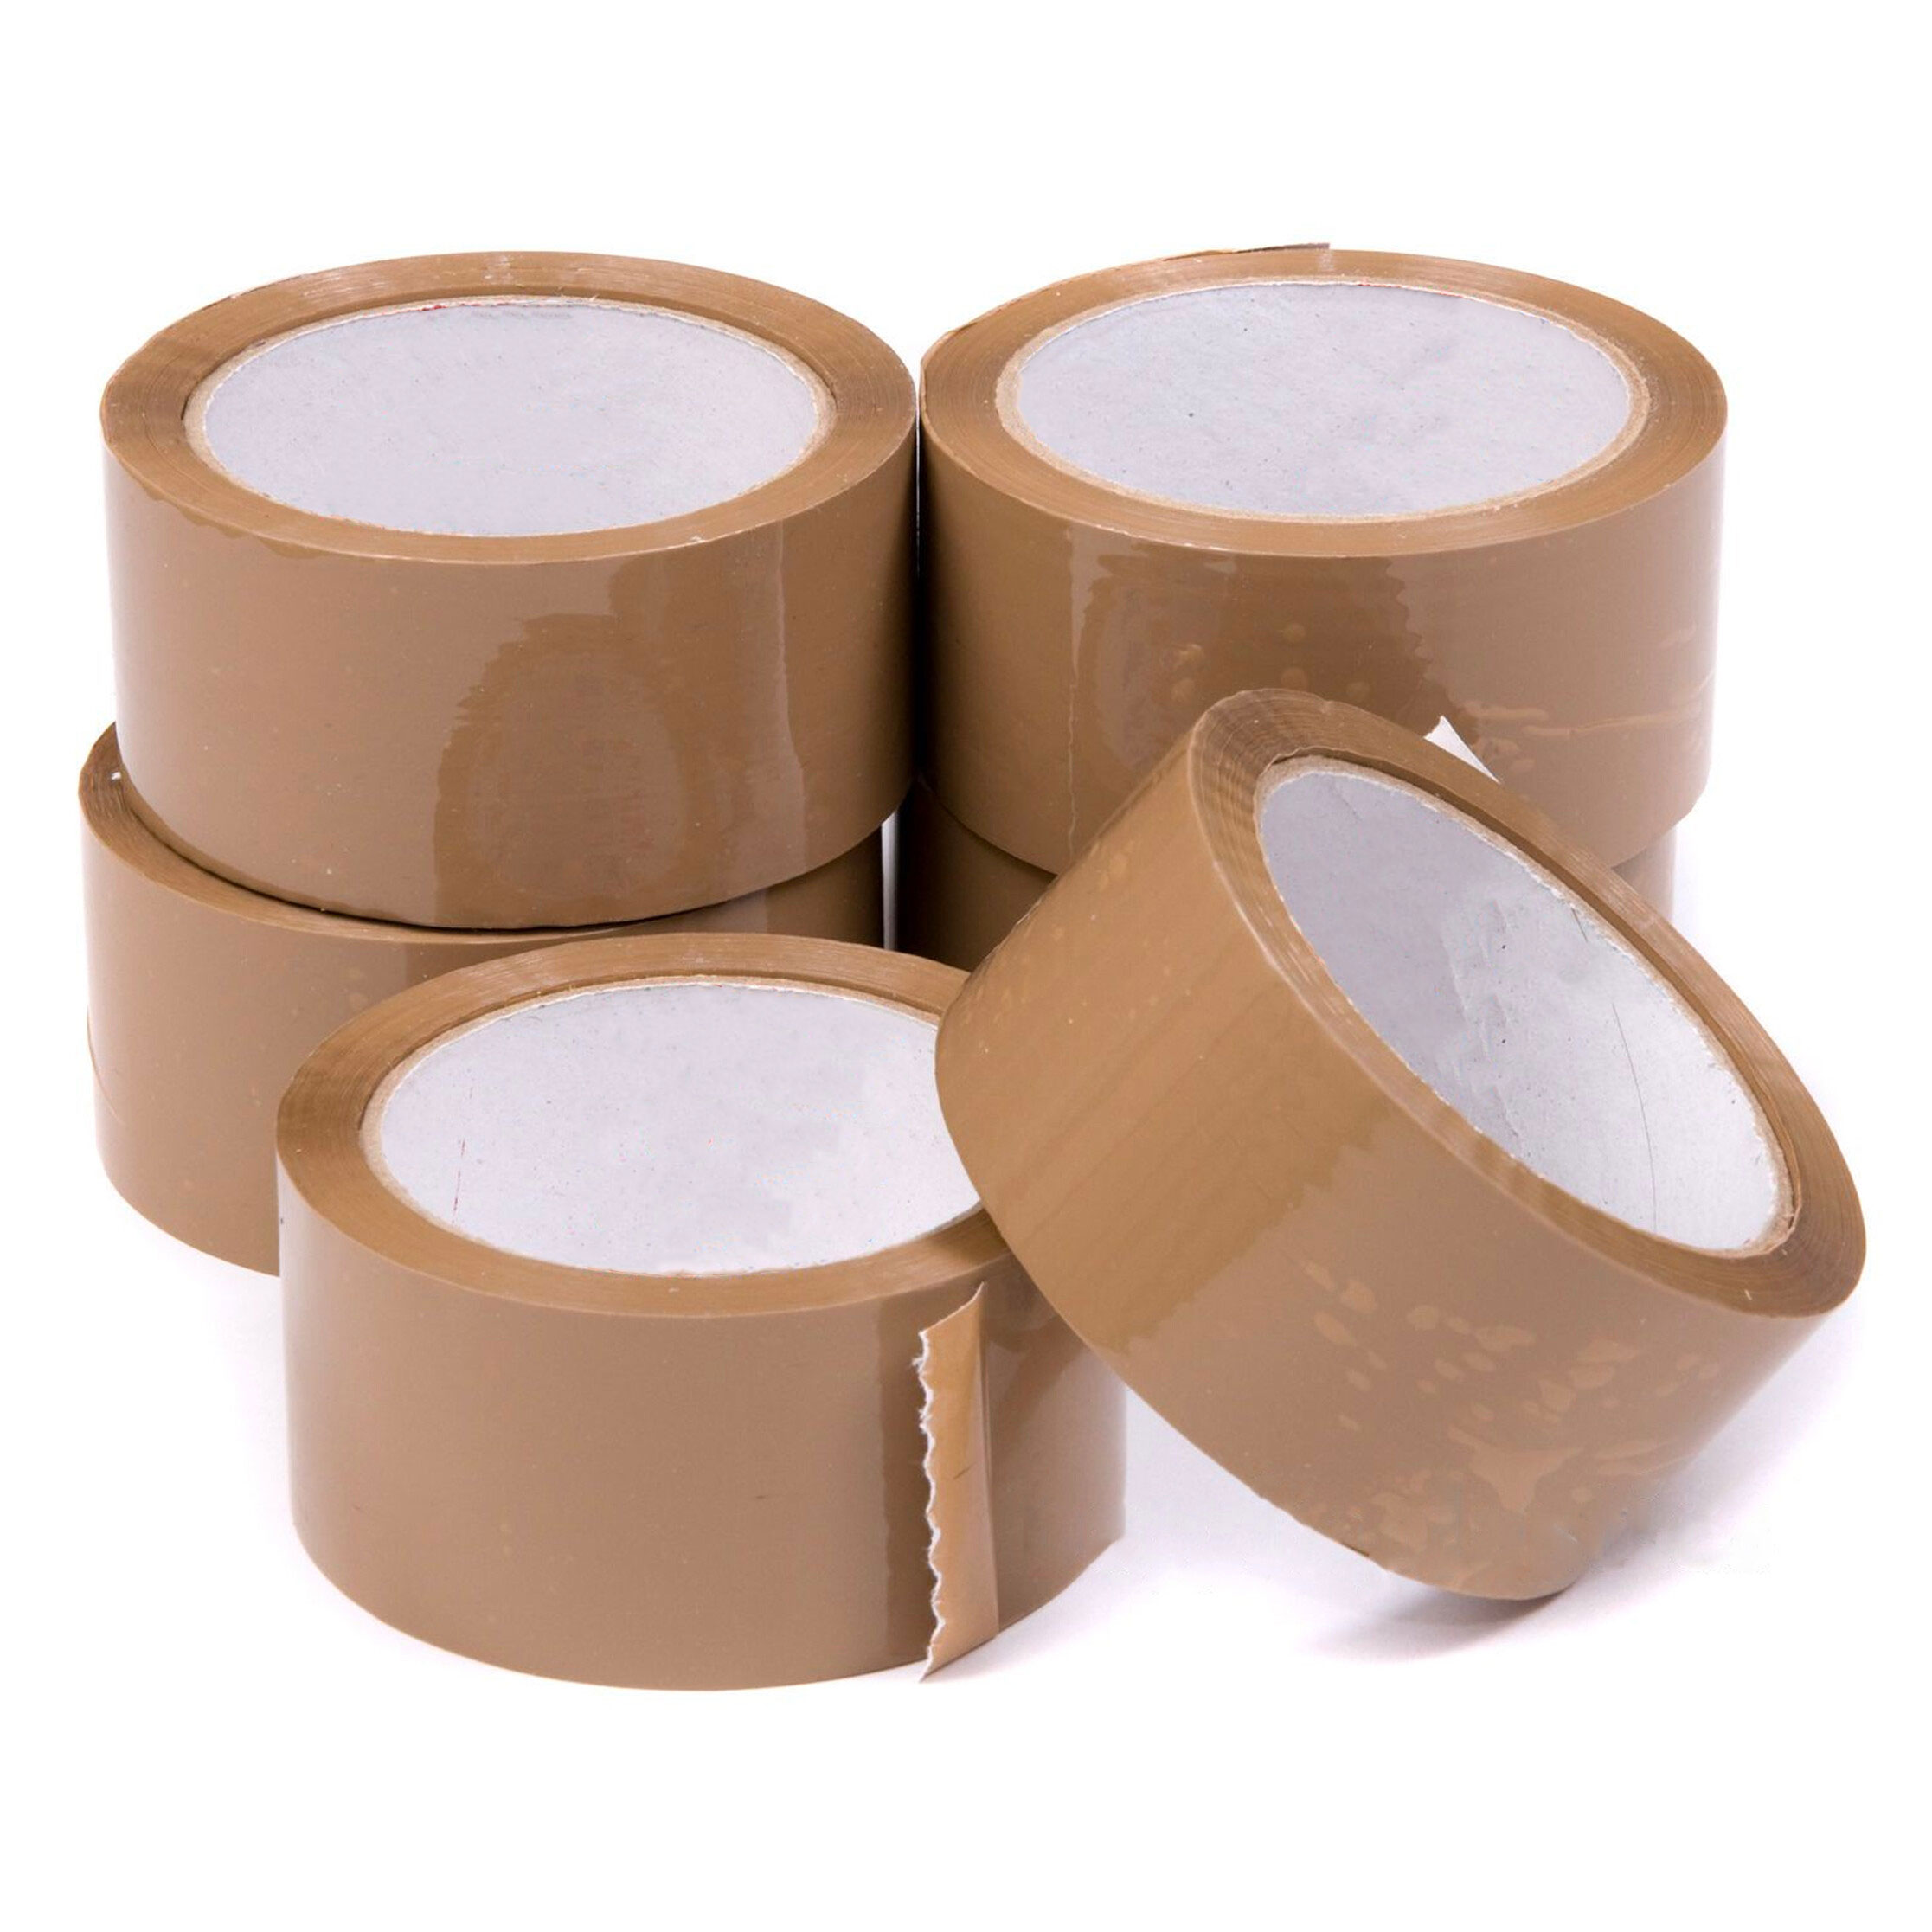 6 ROLLS OF CLEAR PARCEL PACKING TAPE PACKAGING CARTON 48MM X 66M 